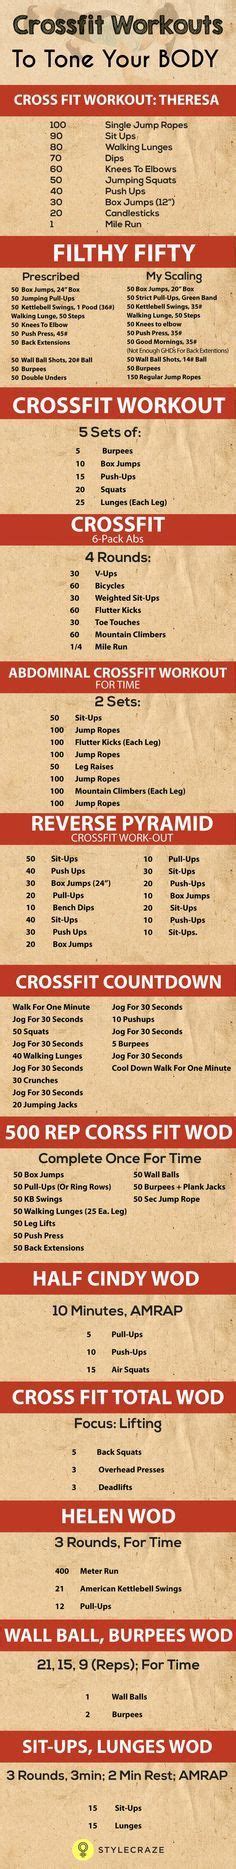 Health And Fitness 20 Effective Crossfit Workouts To Tone Your Body